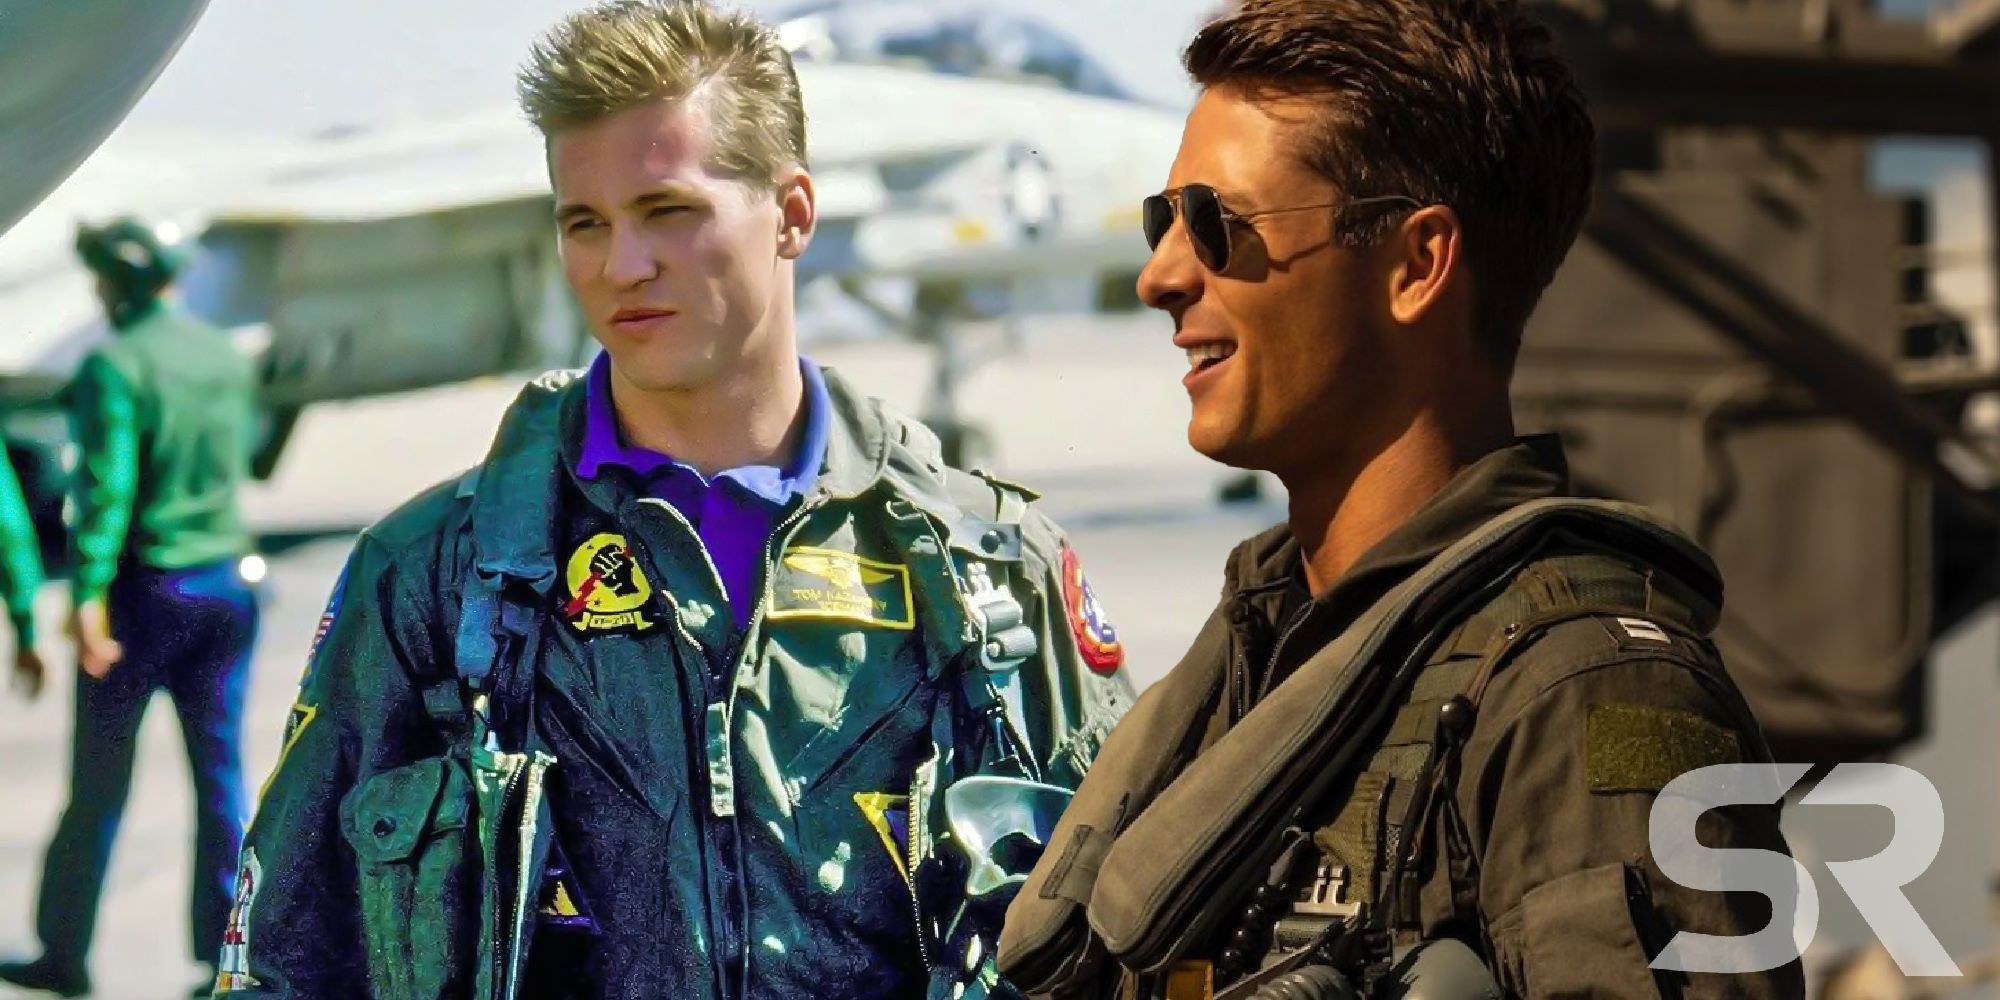 Top Gun characters: Where are Goose, Maverick and Ice Man now? – The US Sun